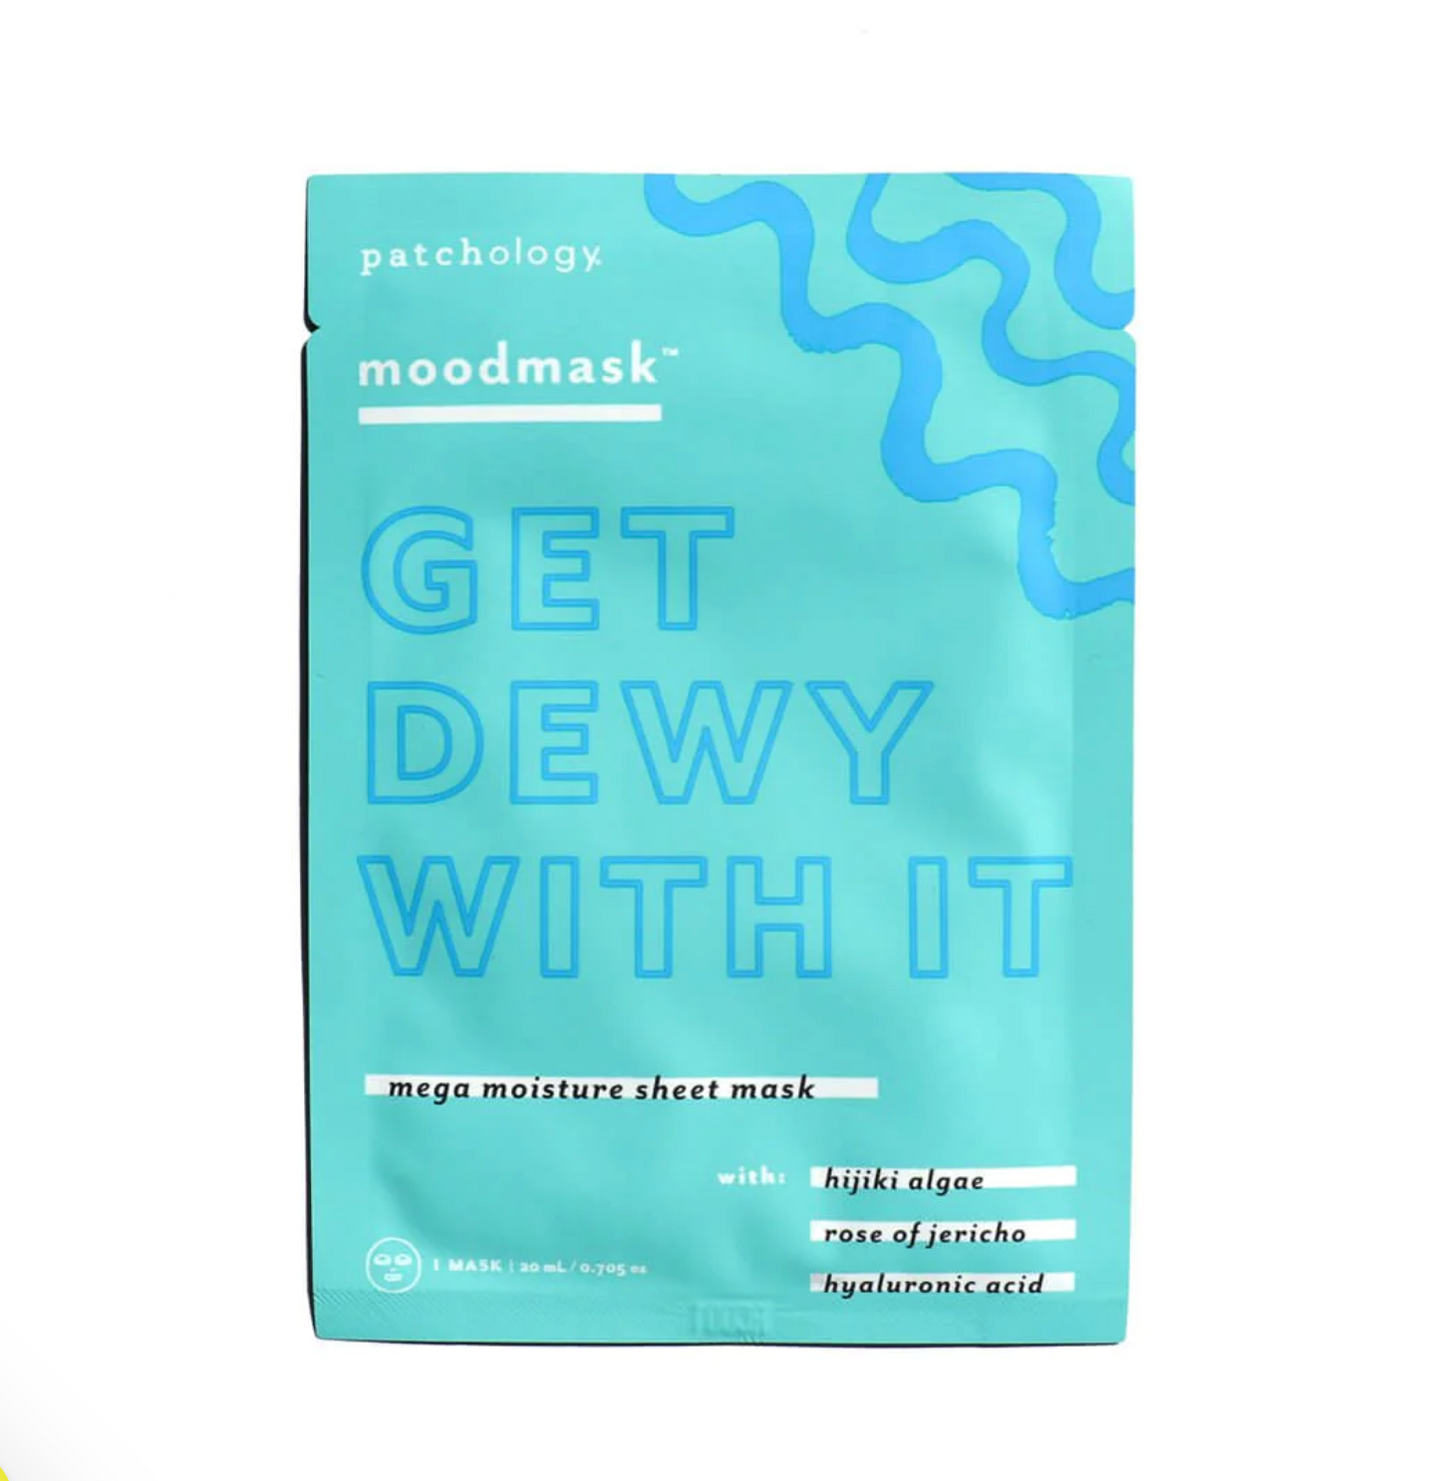 Moodmask - Get Dewy With It